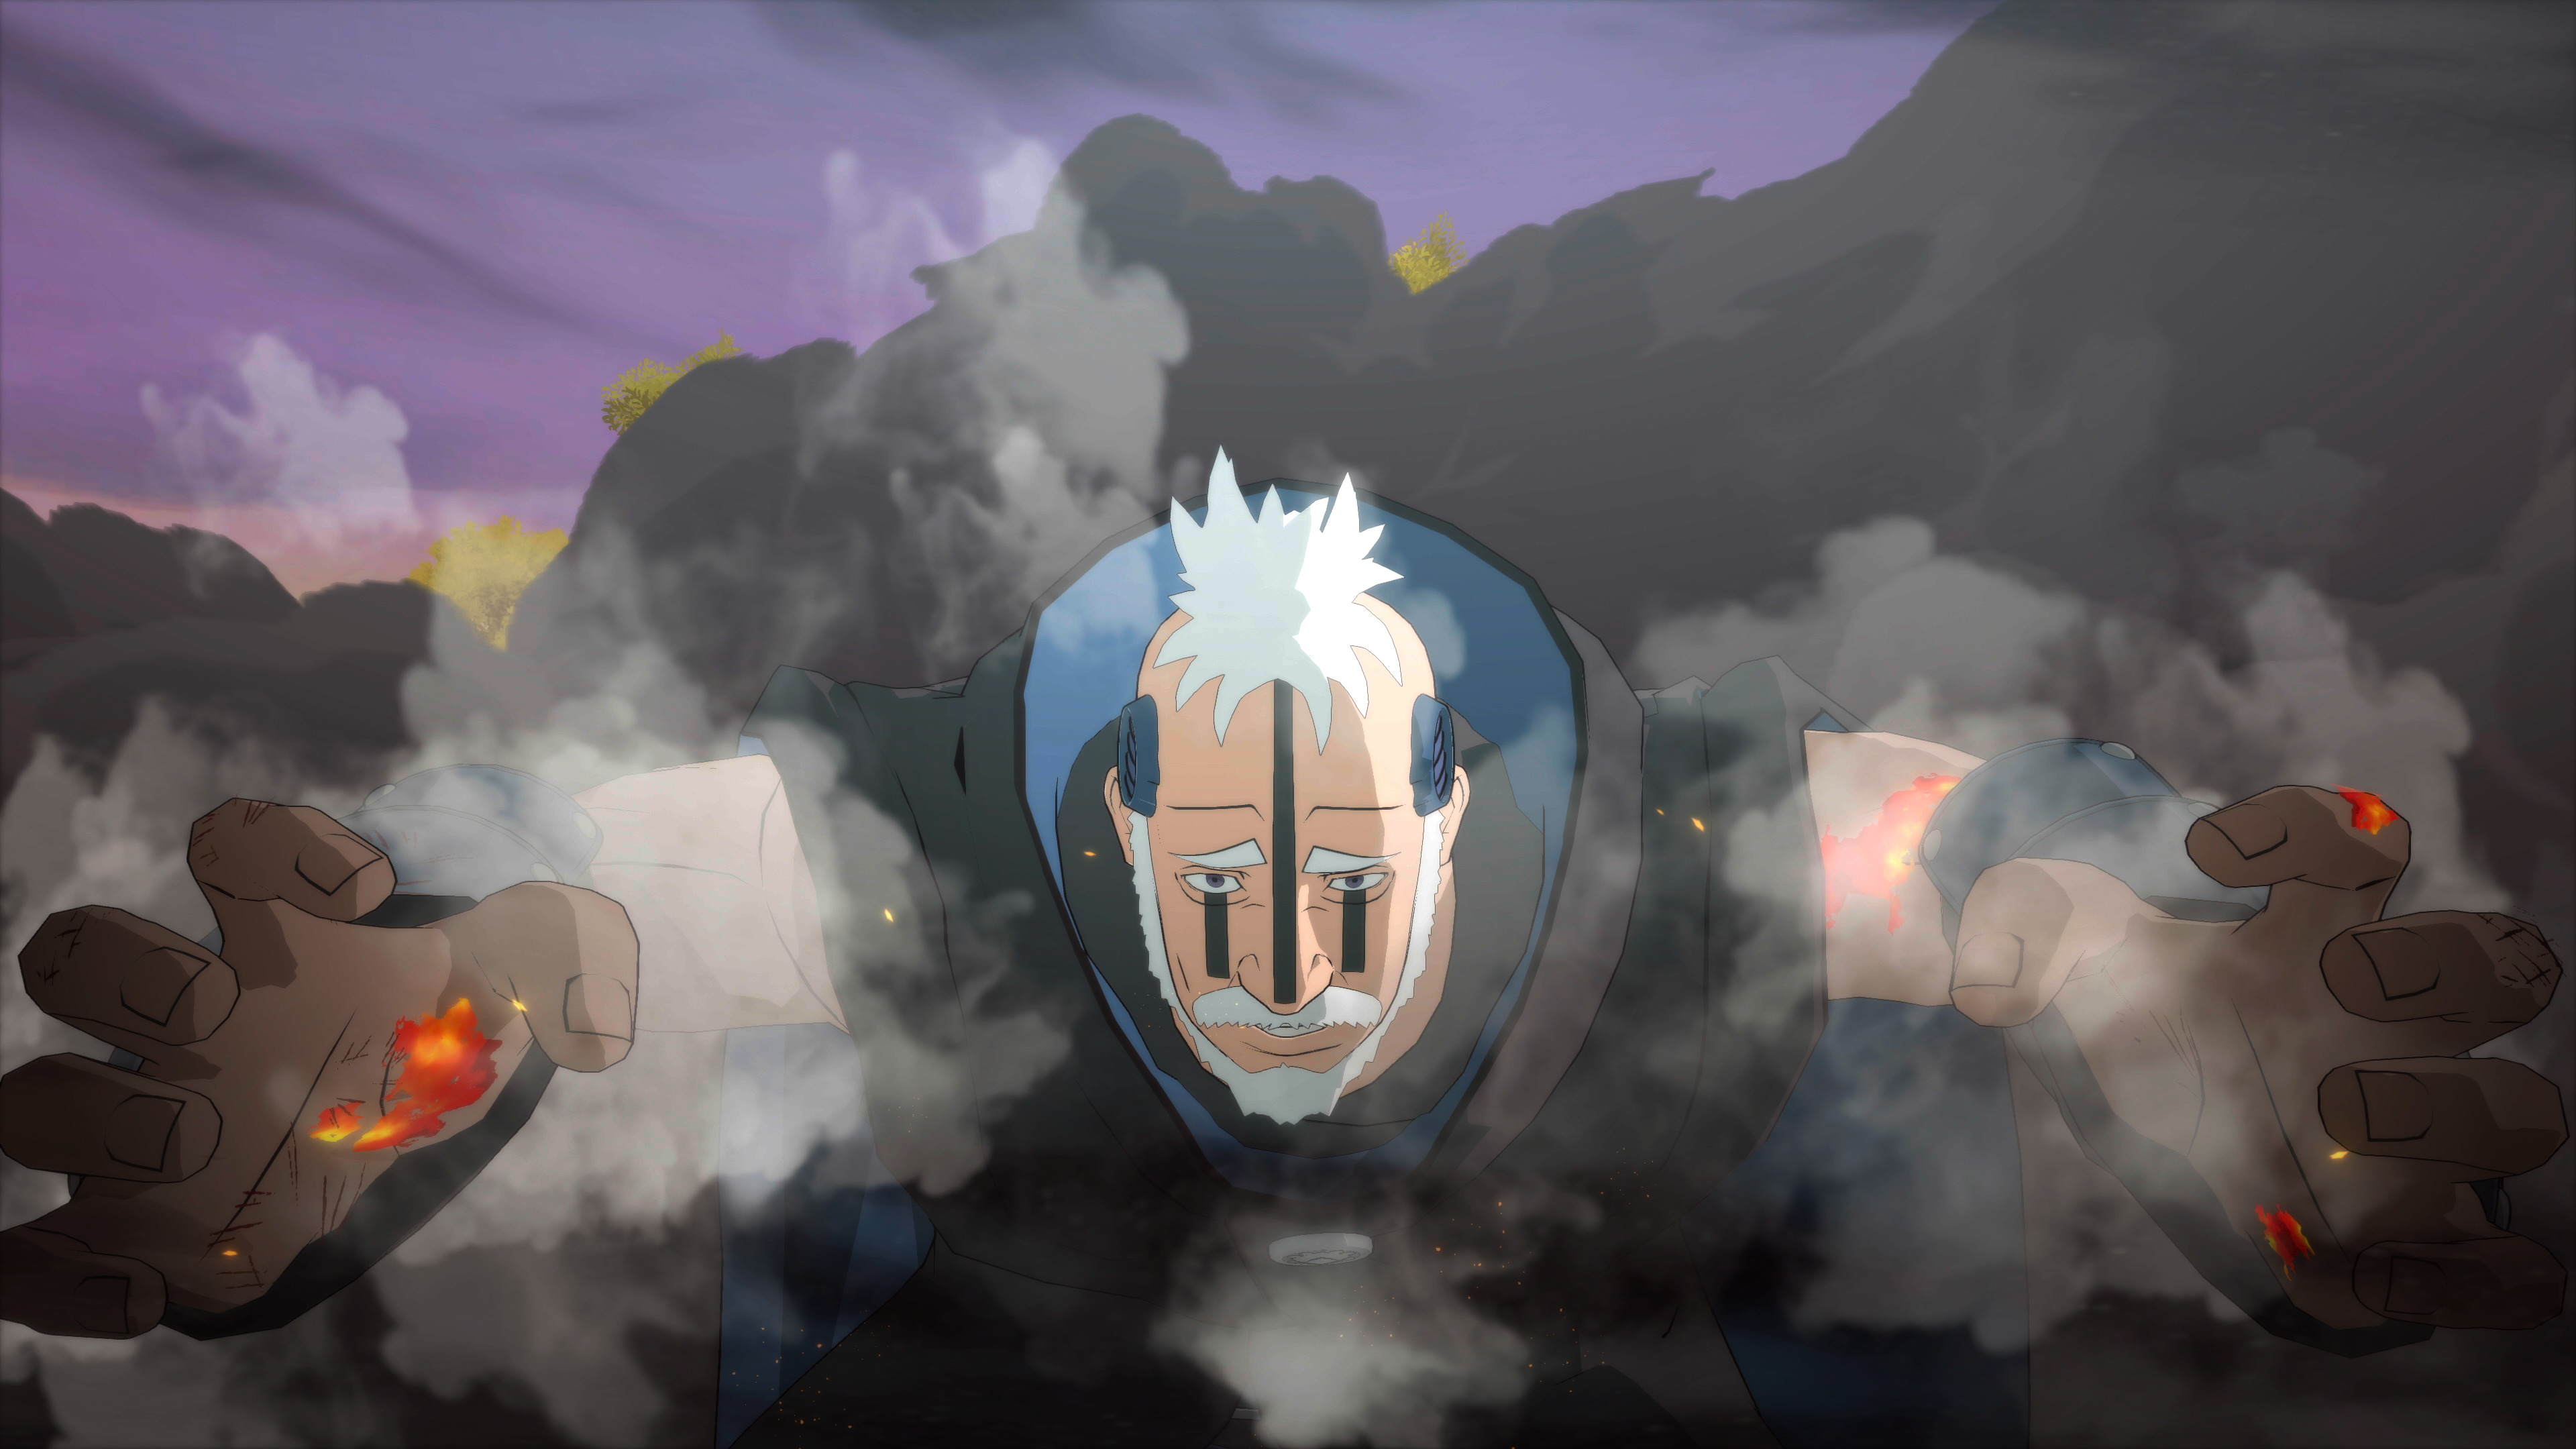 Ninja Storm Connections on X: Kakashi will be playable without his mask  thanks to pre-orders  / X